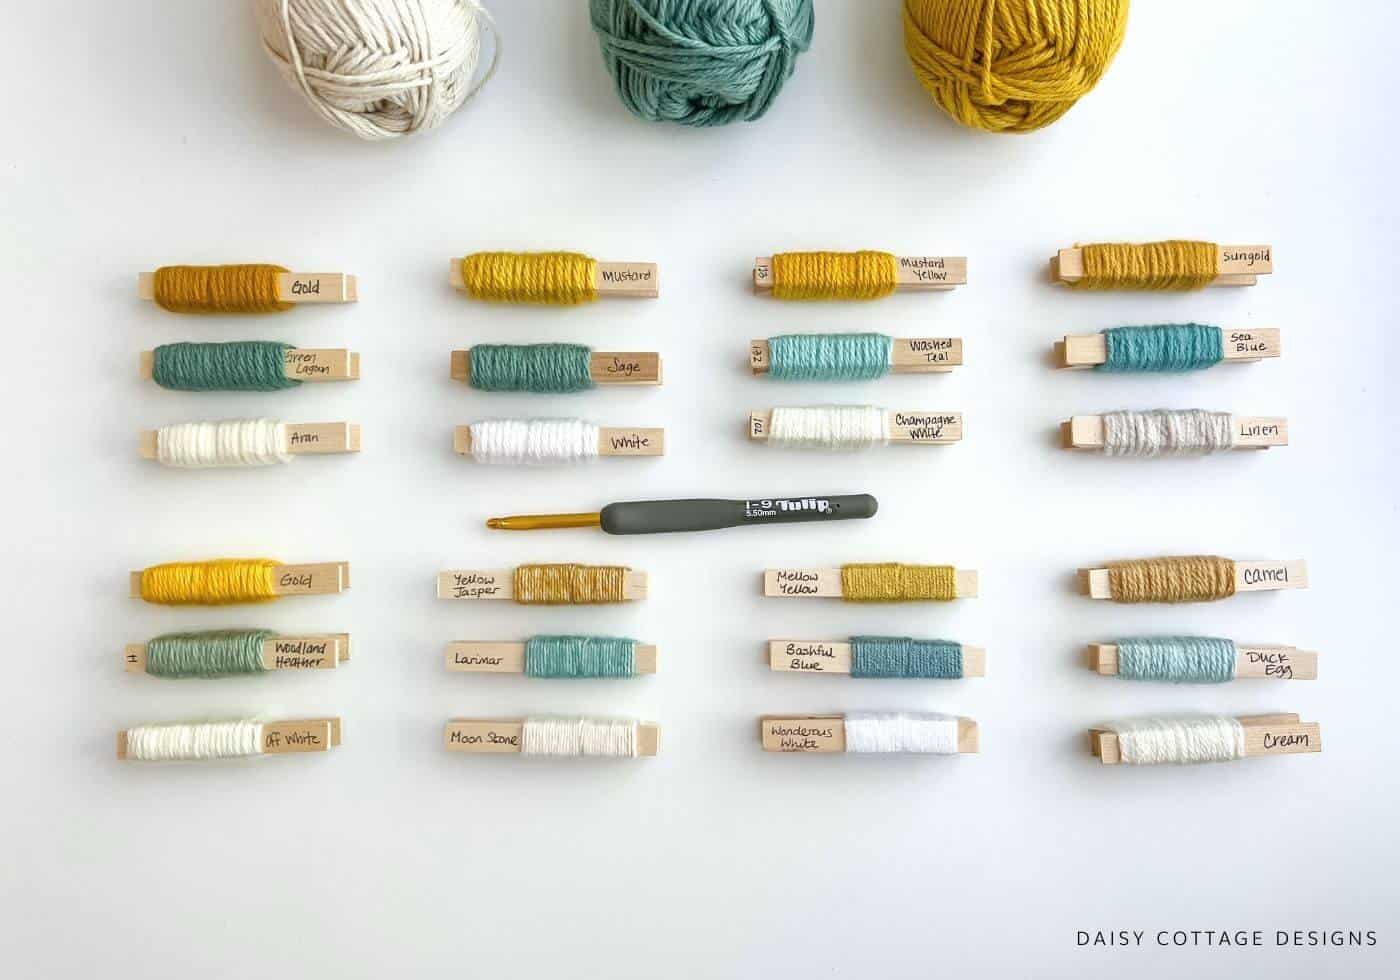 Yarn Pegs in various shades of mustard, teal, and white.